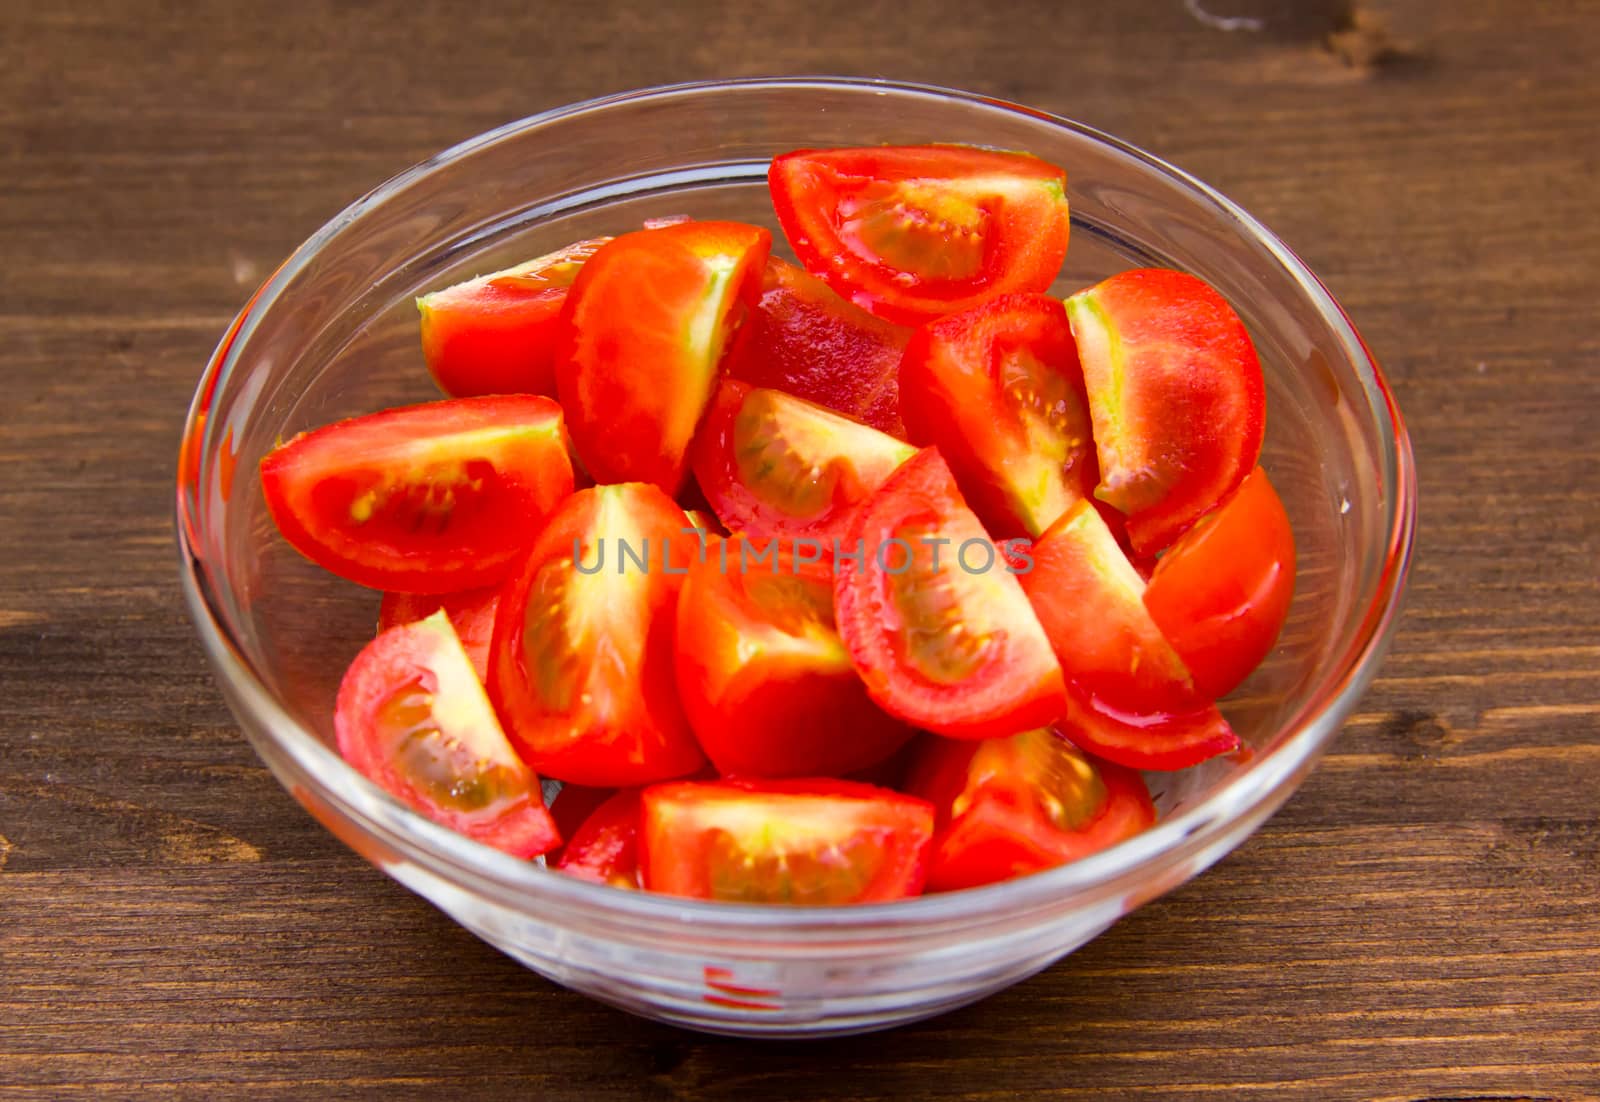 Slices of tomato on bowl over wood by spafra